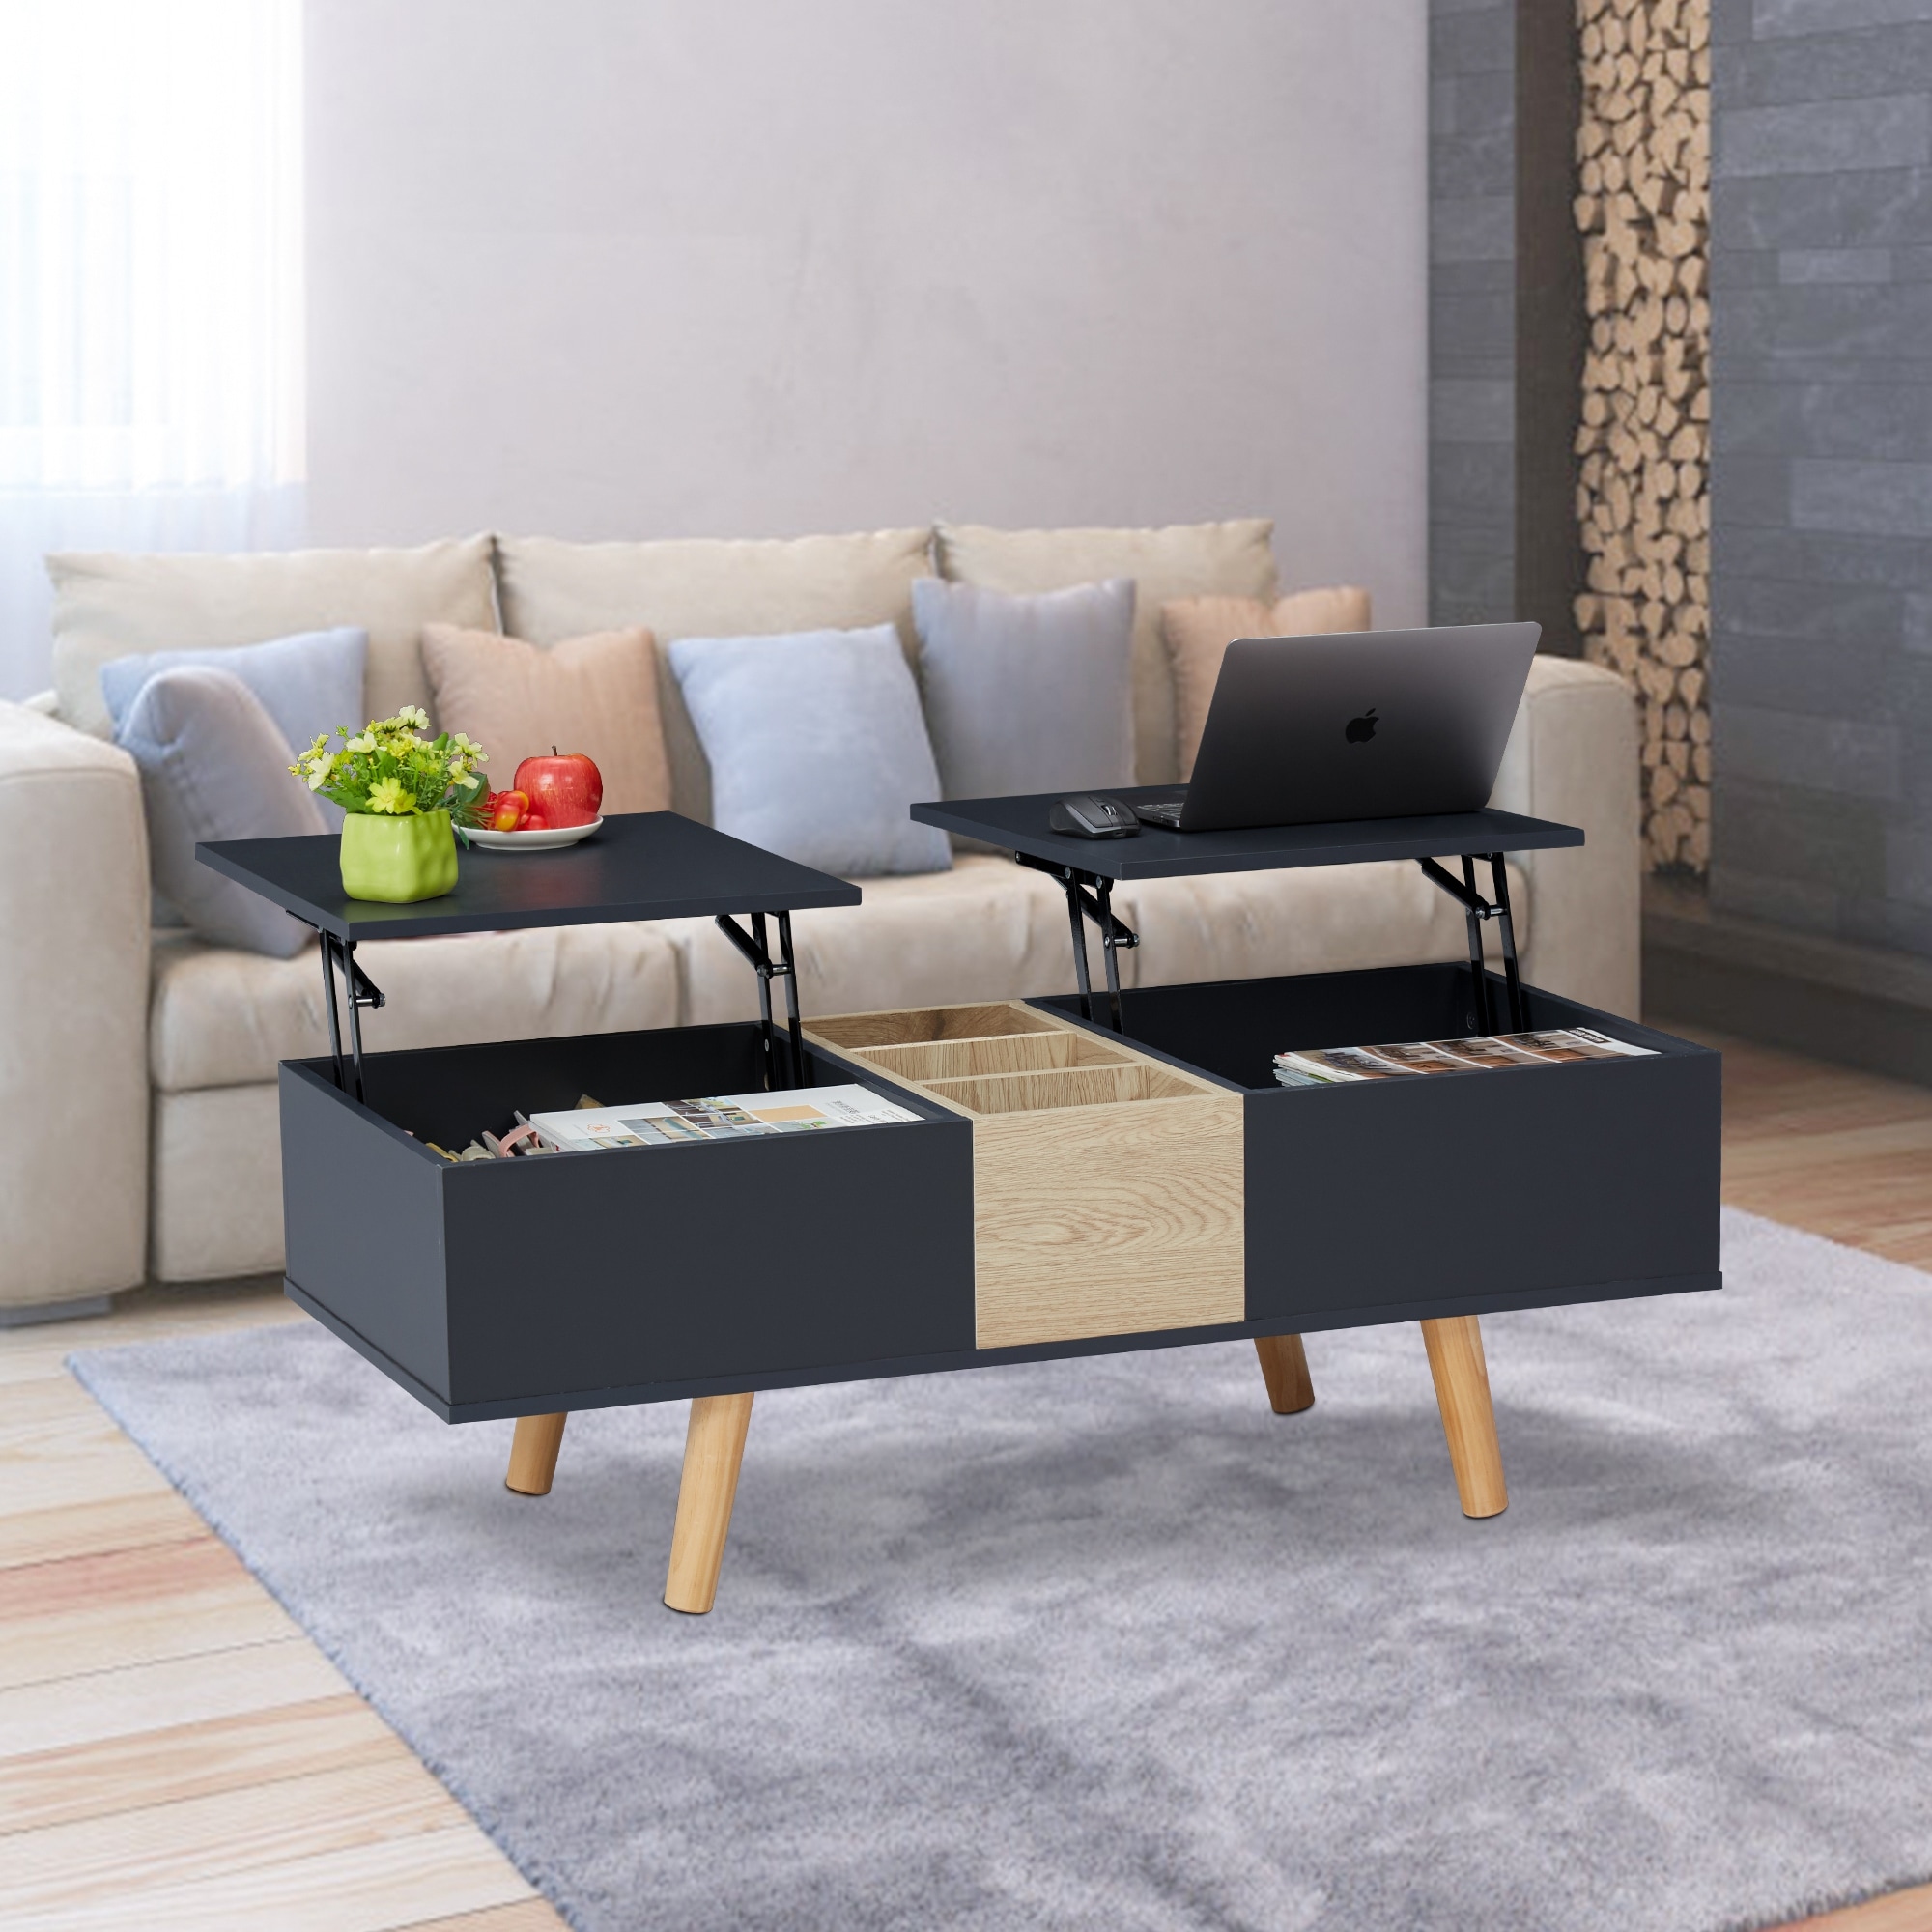 Kinsuite Lift Top Coffee Table with Hidden Compartment and Storage Shelf Modern Wood Rising Desk for Living Room Reception Room 